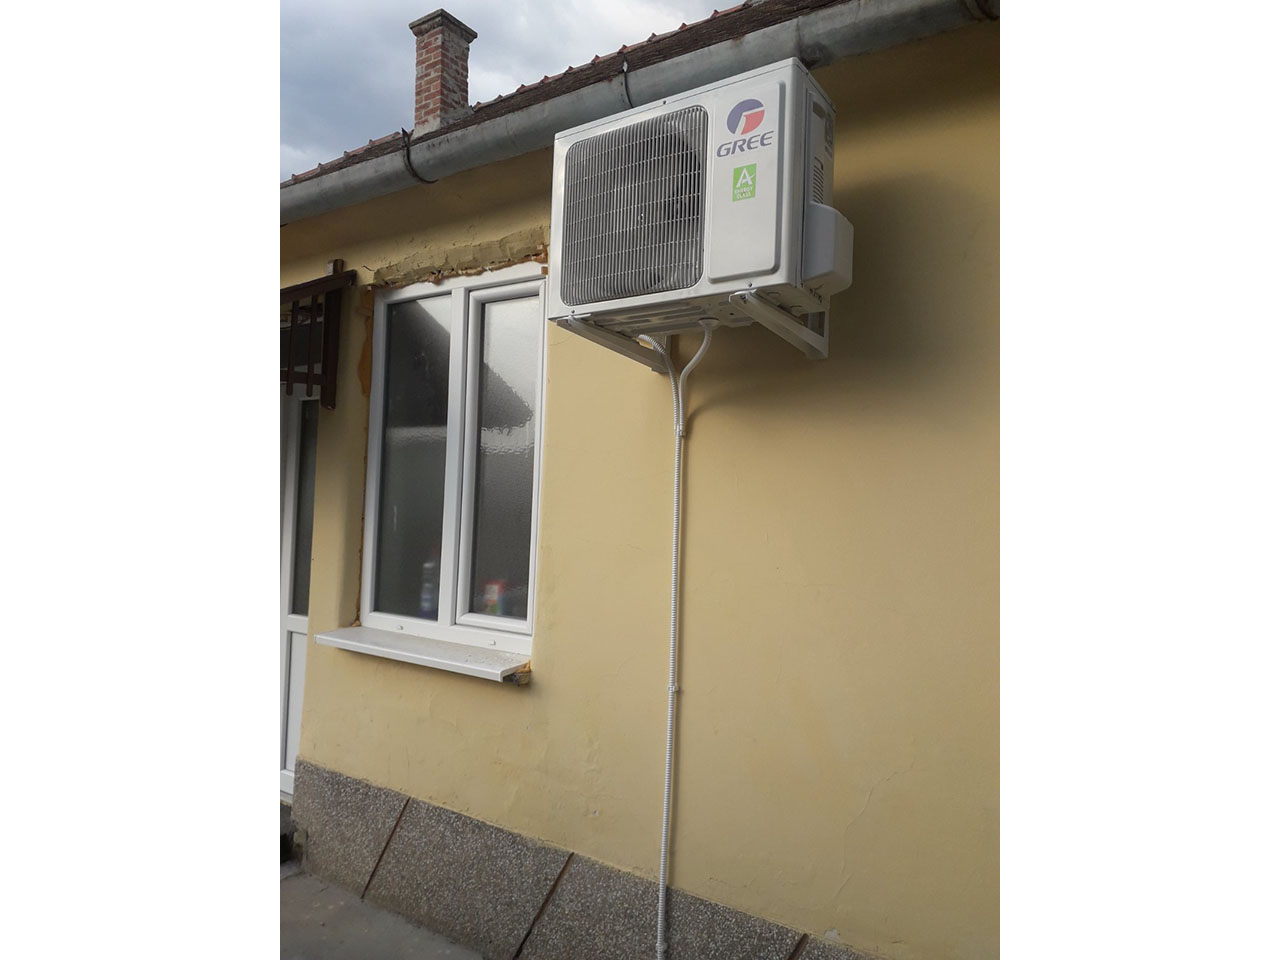 HOME APPLIANCES AND AIR CONDITIONING SERVICE ATILA 023 Electrical equipment, service and sales Zrenjanin - Photo 2